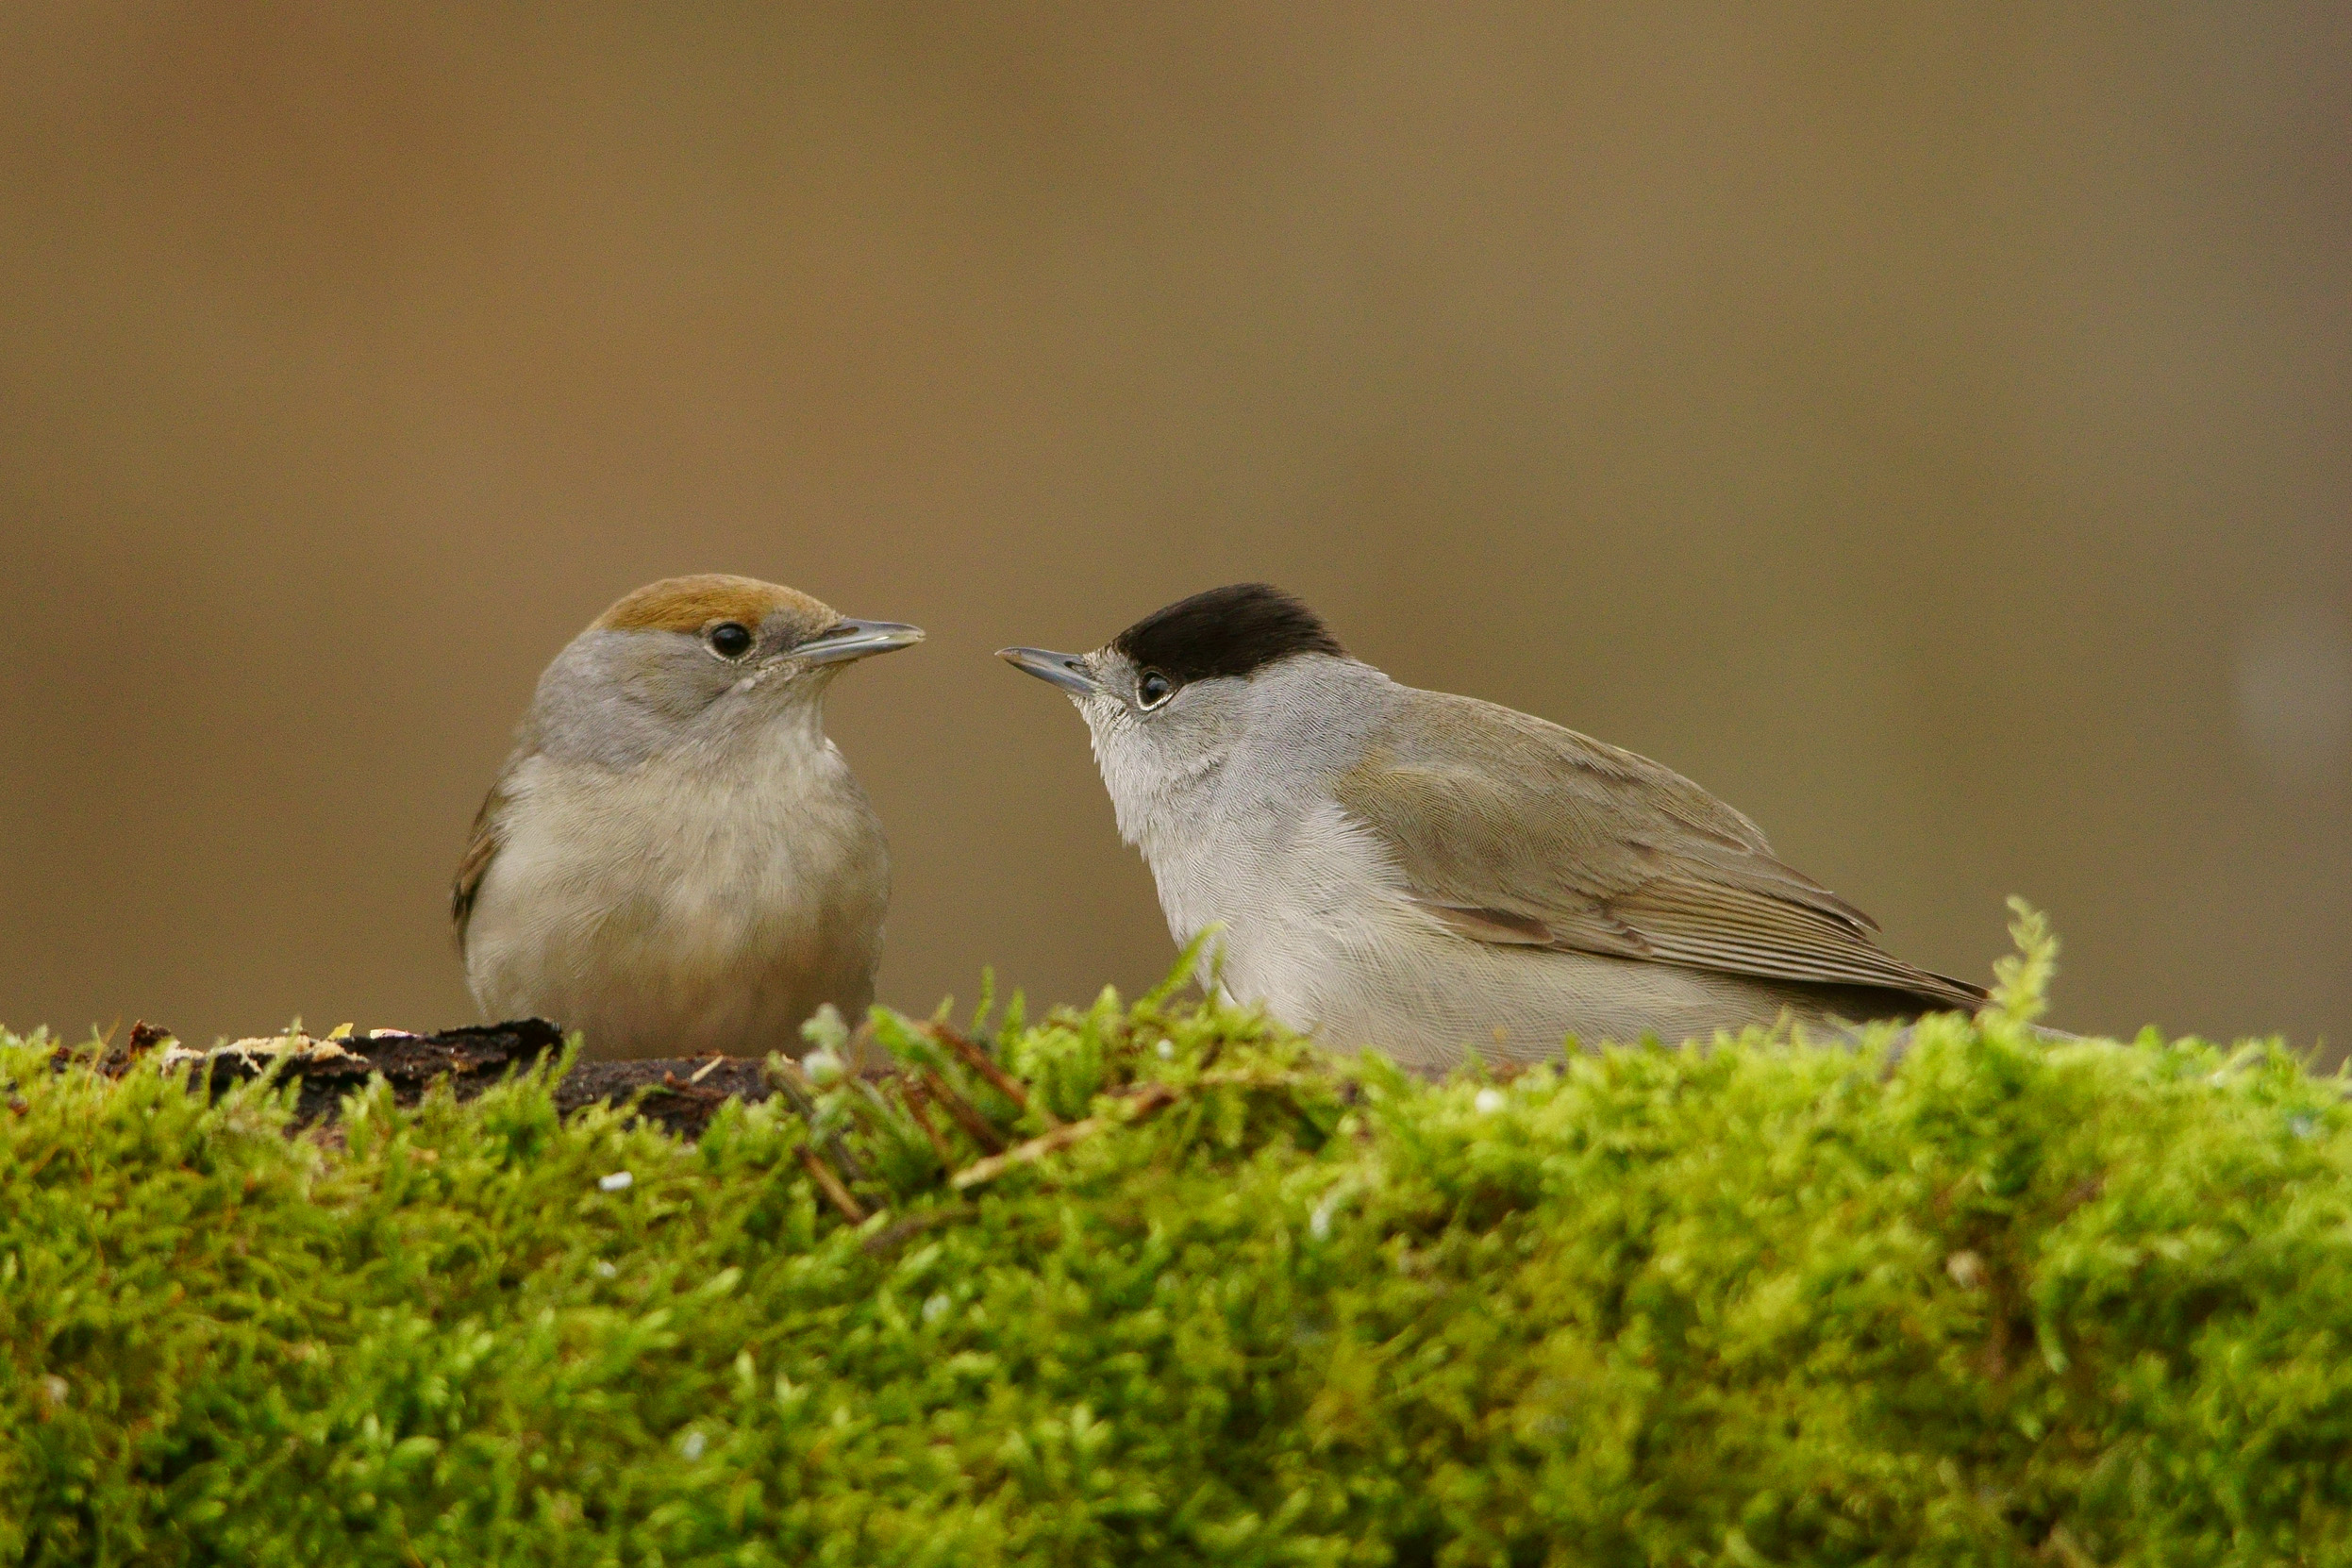 A pair of Blackcaps, male and female, perched on a mossy log and facing each other